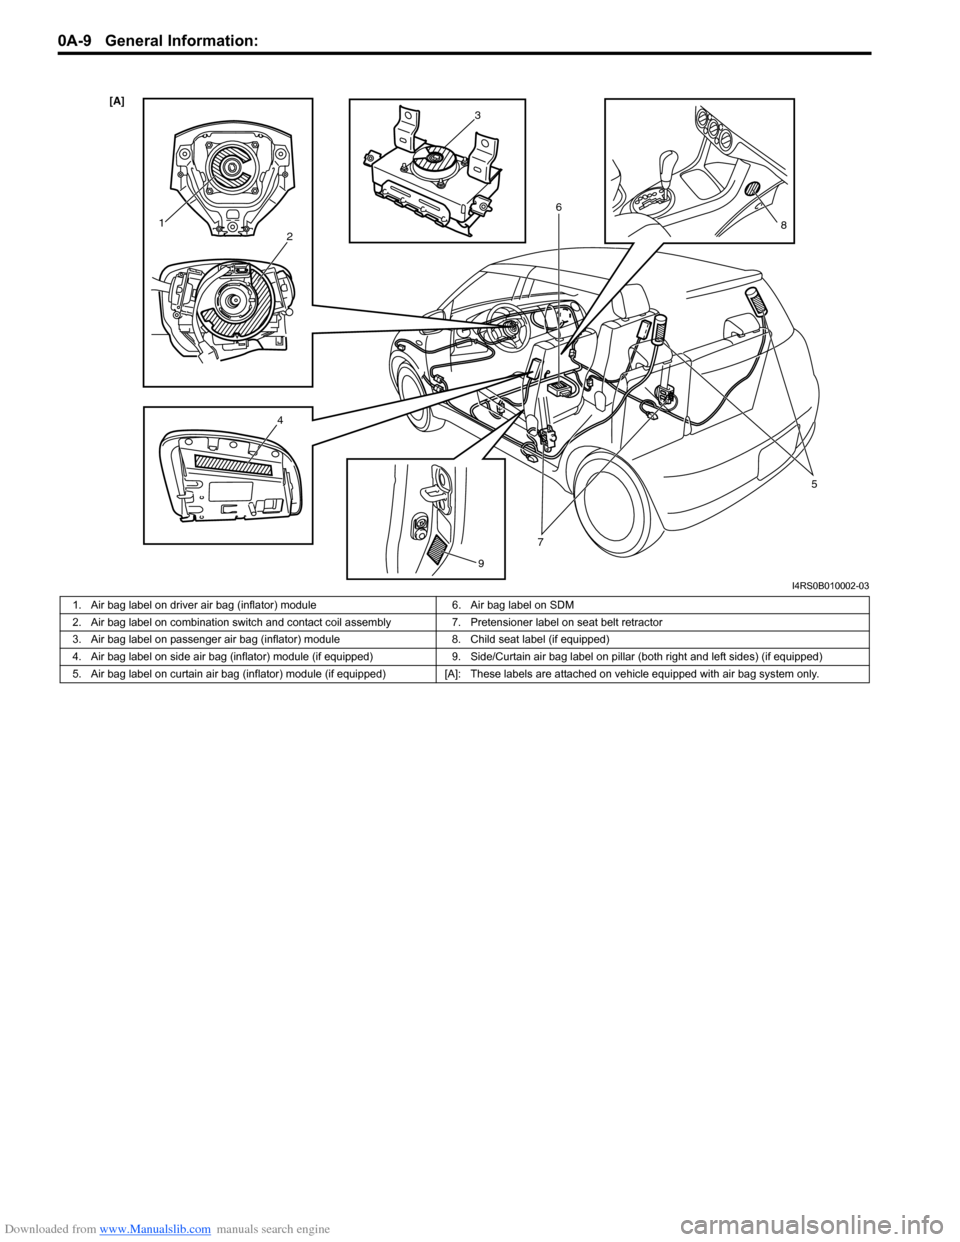 SUZUKI SWIFT 2007 2.G Service Owners Manual Downloaded from www.Manualslib.com manuals search engine 0A-9 General Information: 
[A] 
12
4 5
6
7 8
9
3
I4RS0B010002-03
1. Air bag label on driver air bag (inflator) module 6. Air bag label on SDM
2